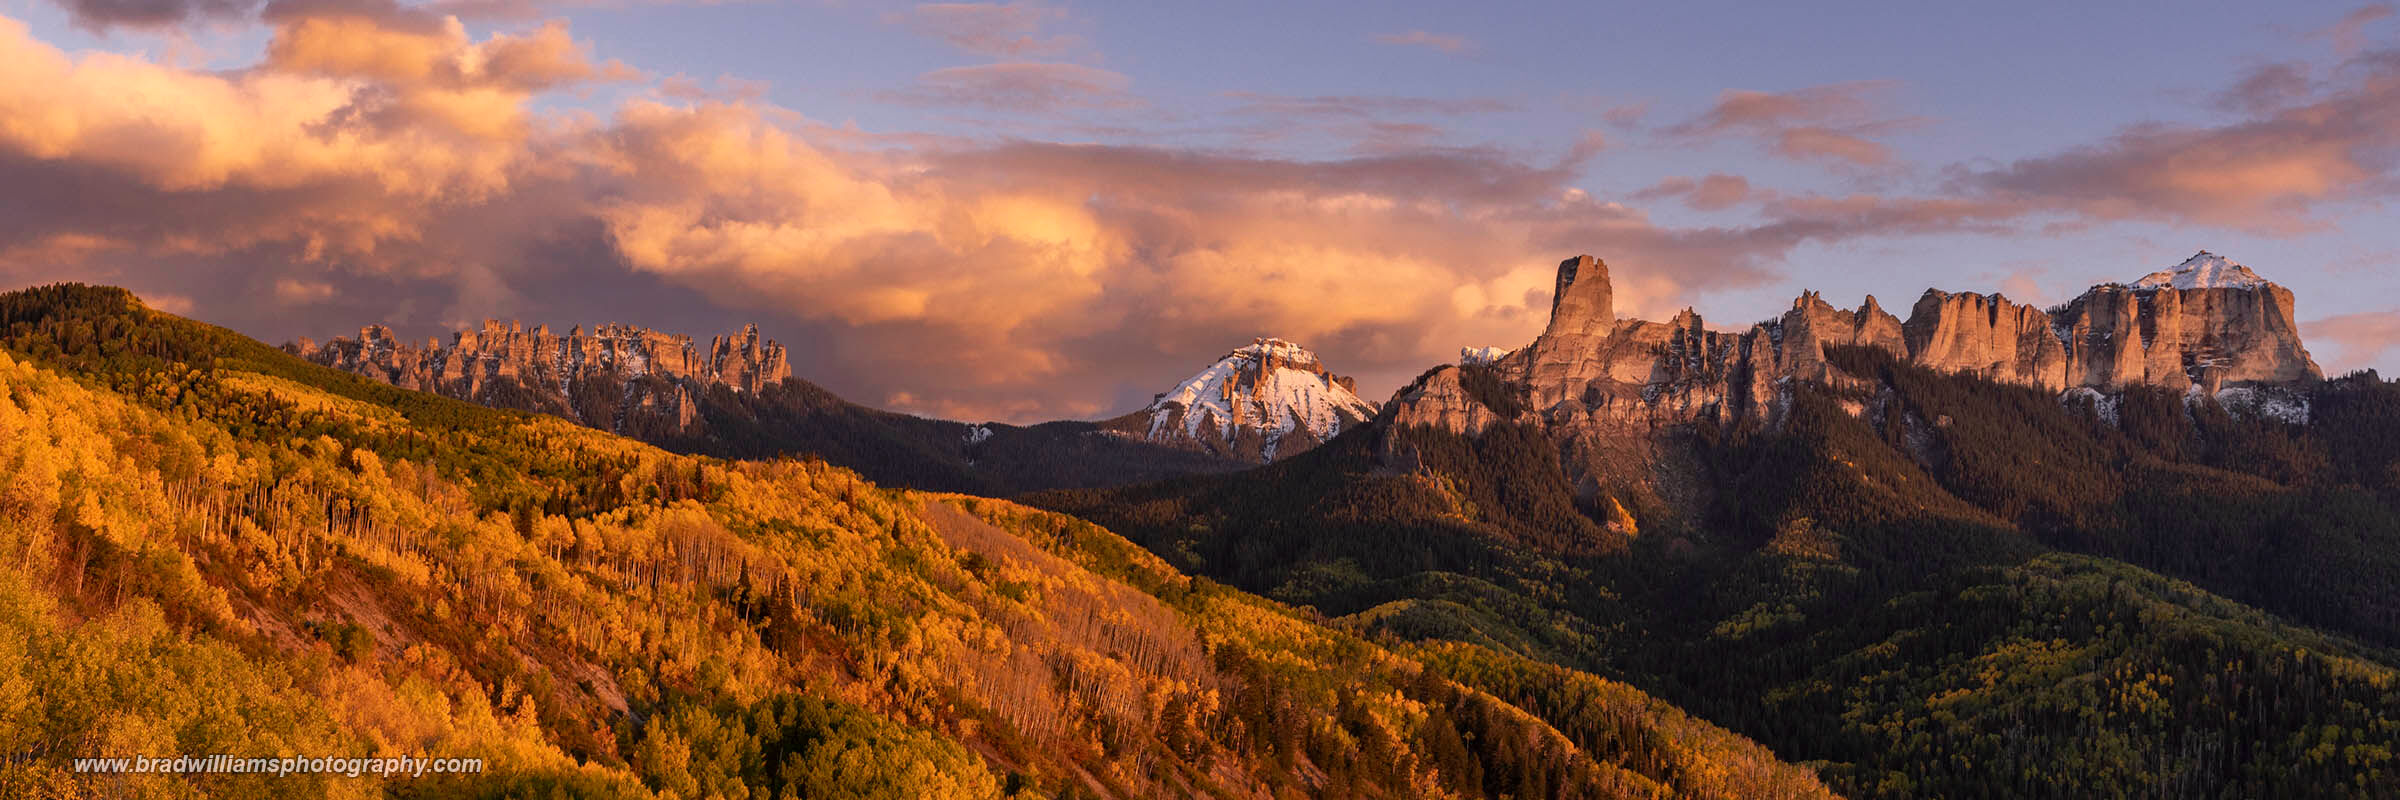 Its a great fall afternoon and suns warm glow is reflecting on the iconic Chimney Rock on the Owl Creek Pass in the Uncompahgre...